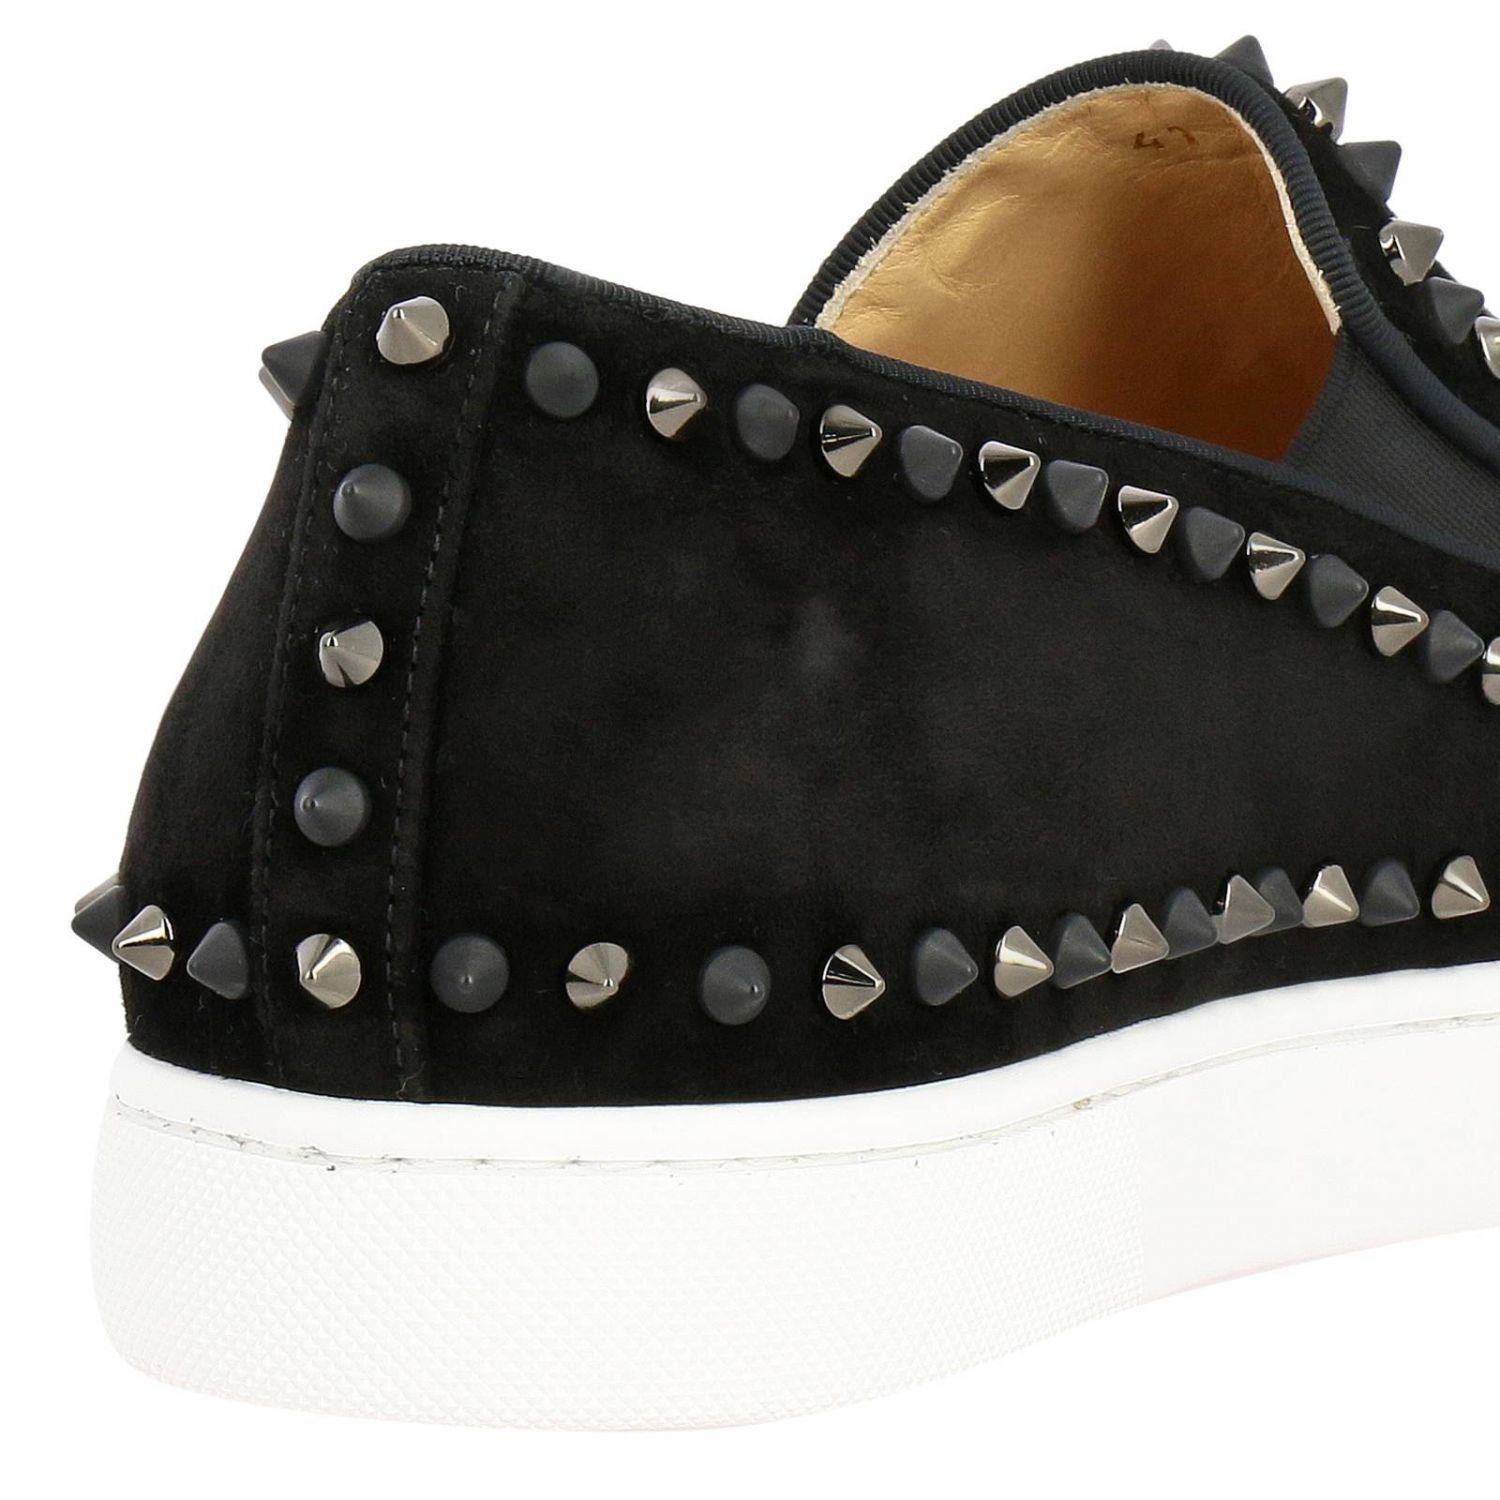 En begivenhed Mursten holdall CHRISTIAN LOUBOUTIN: Pik boat slip on sneakers in suede with studs |  Sneakers Christian Louboutin Men Black | Sneakers Christian Louboutin  1130280 GIGLIO.COM